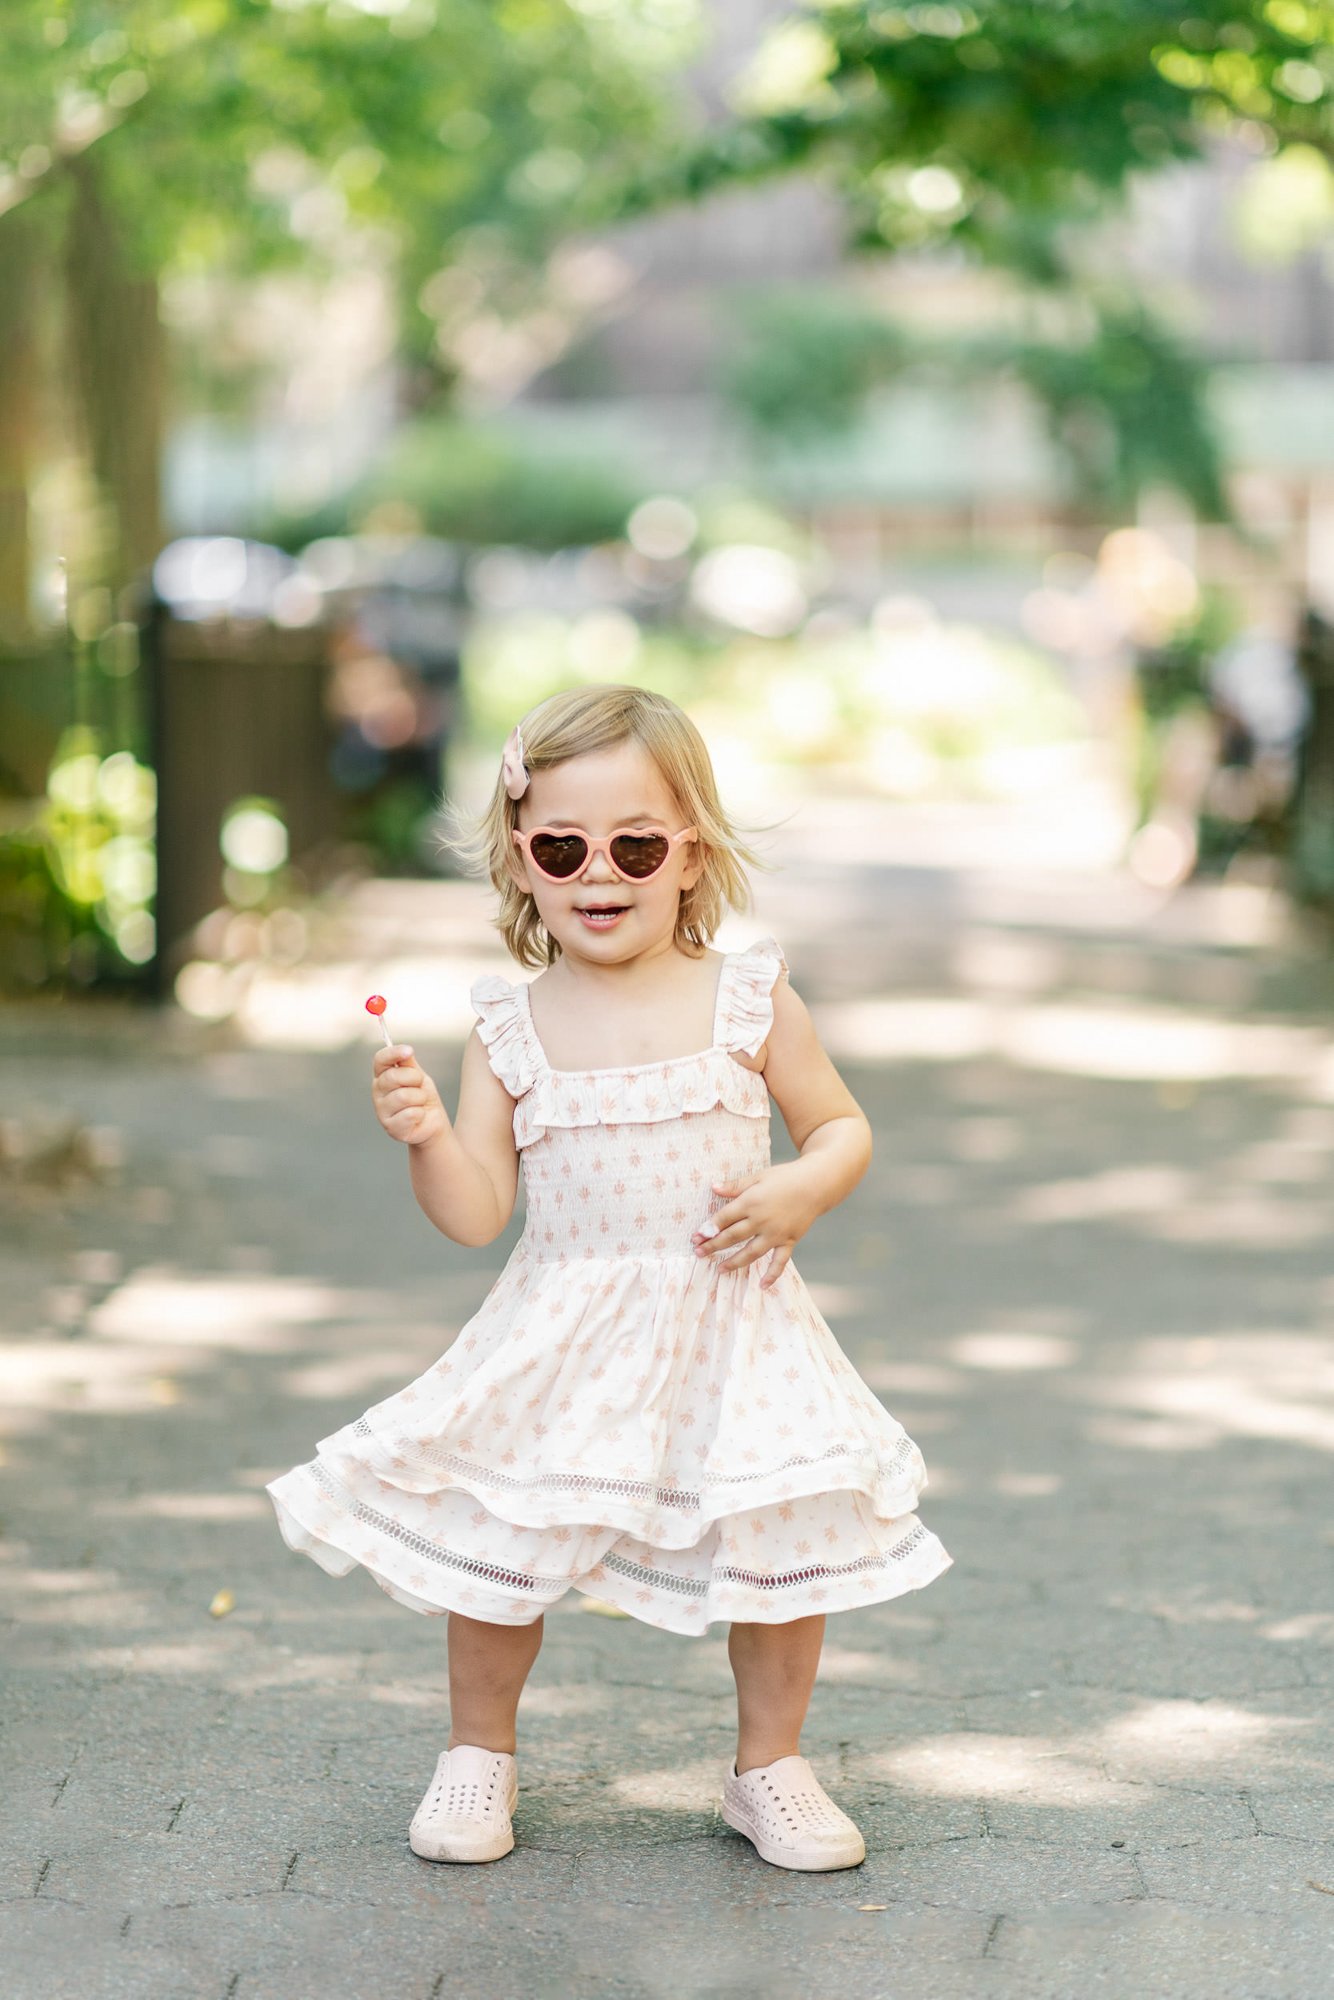   Outdoor family photoshoot with toddler girl walking down a pathway twirling in her dress. Toddler photo pose ideas family photo pose suggestions #EssexCountyFamilyPhotographer #MorrisCountyFamilyPhotographer #NorthernNewJerseyFamilyPhotographer #No